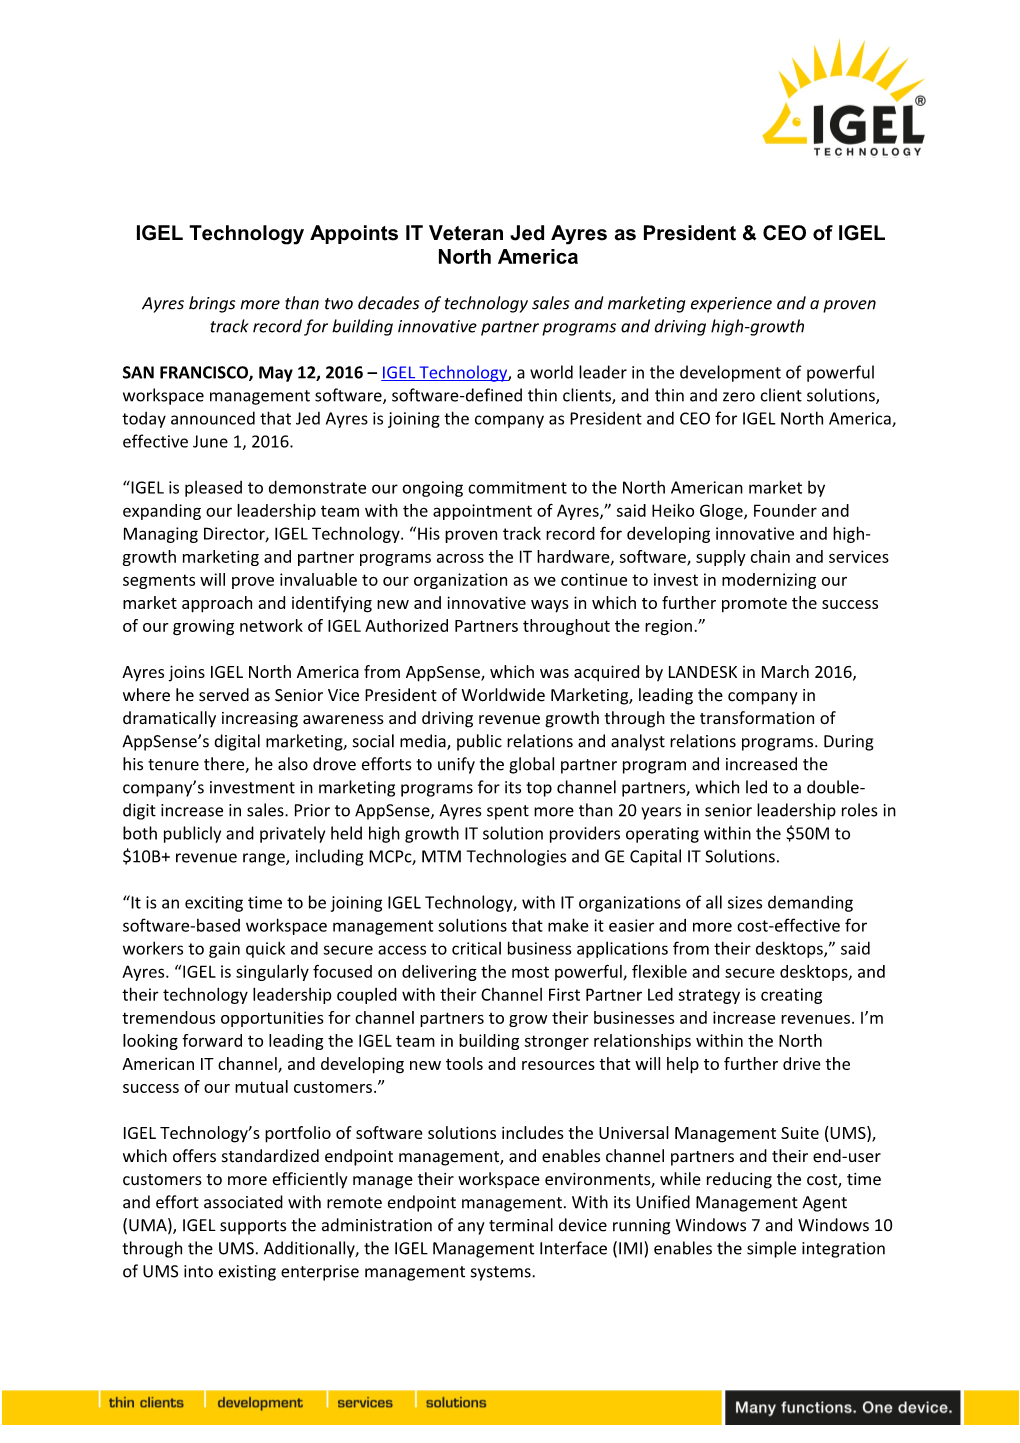 IGEL Technology Appoints IT Veteran Jed Ayres As President & CEO of IGEL North America